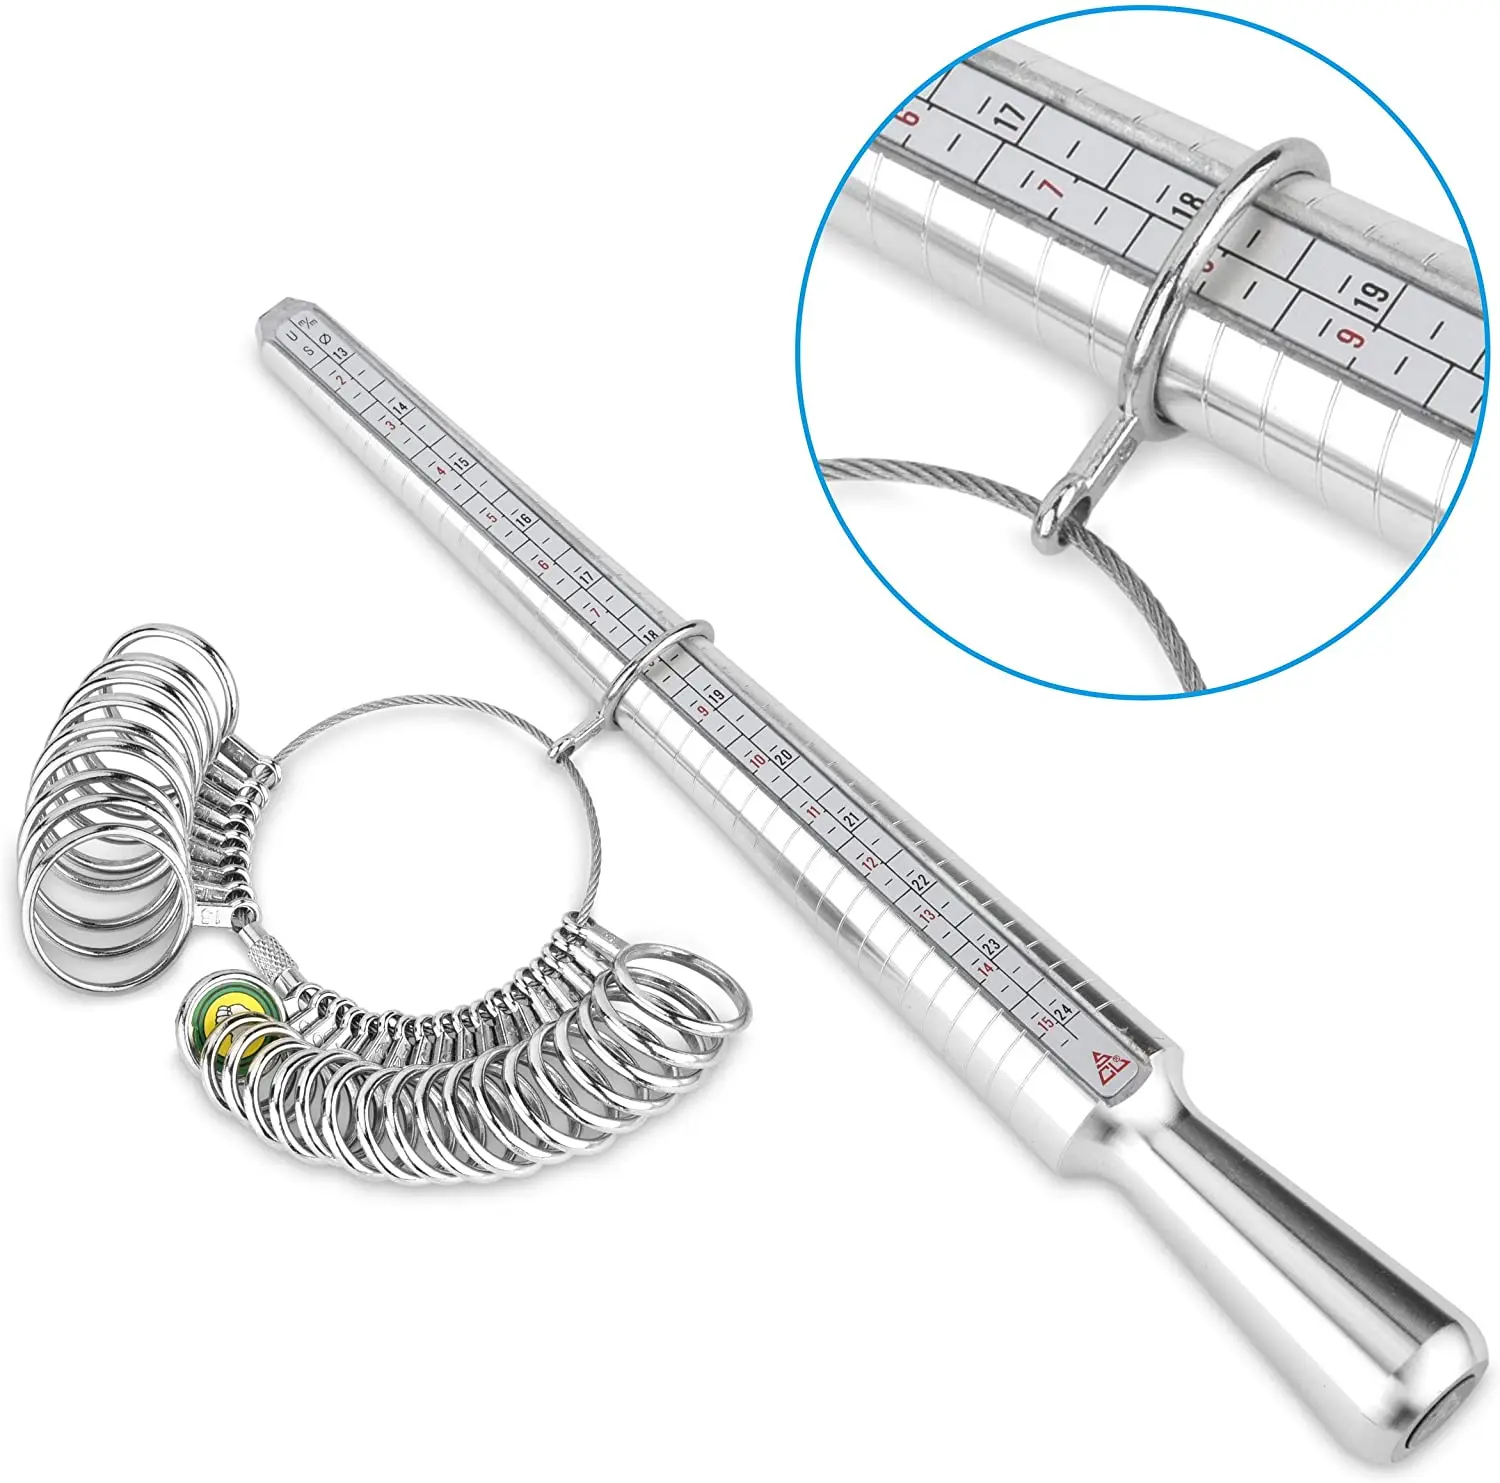 

Professional Jewelry Tools Ring Mandrel Stick Finger Gauge Ring Sizer Measuring UK/US Size For DIY Jewelry Size Tool Sets